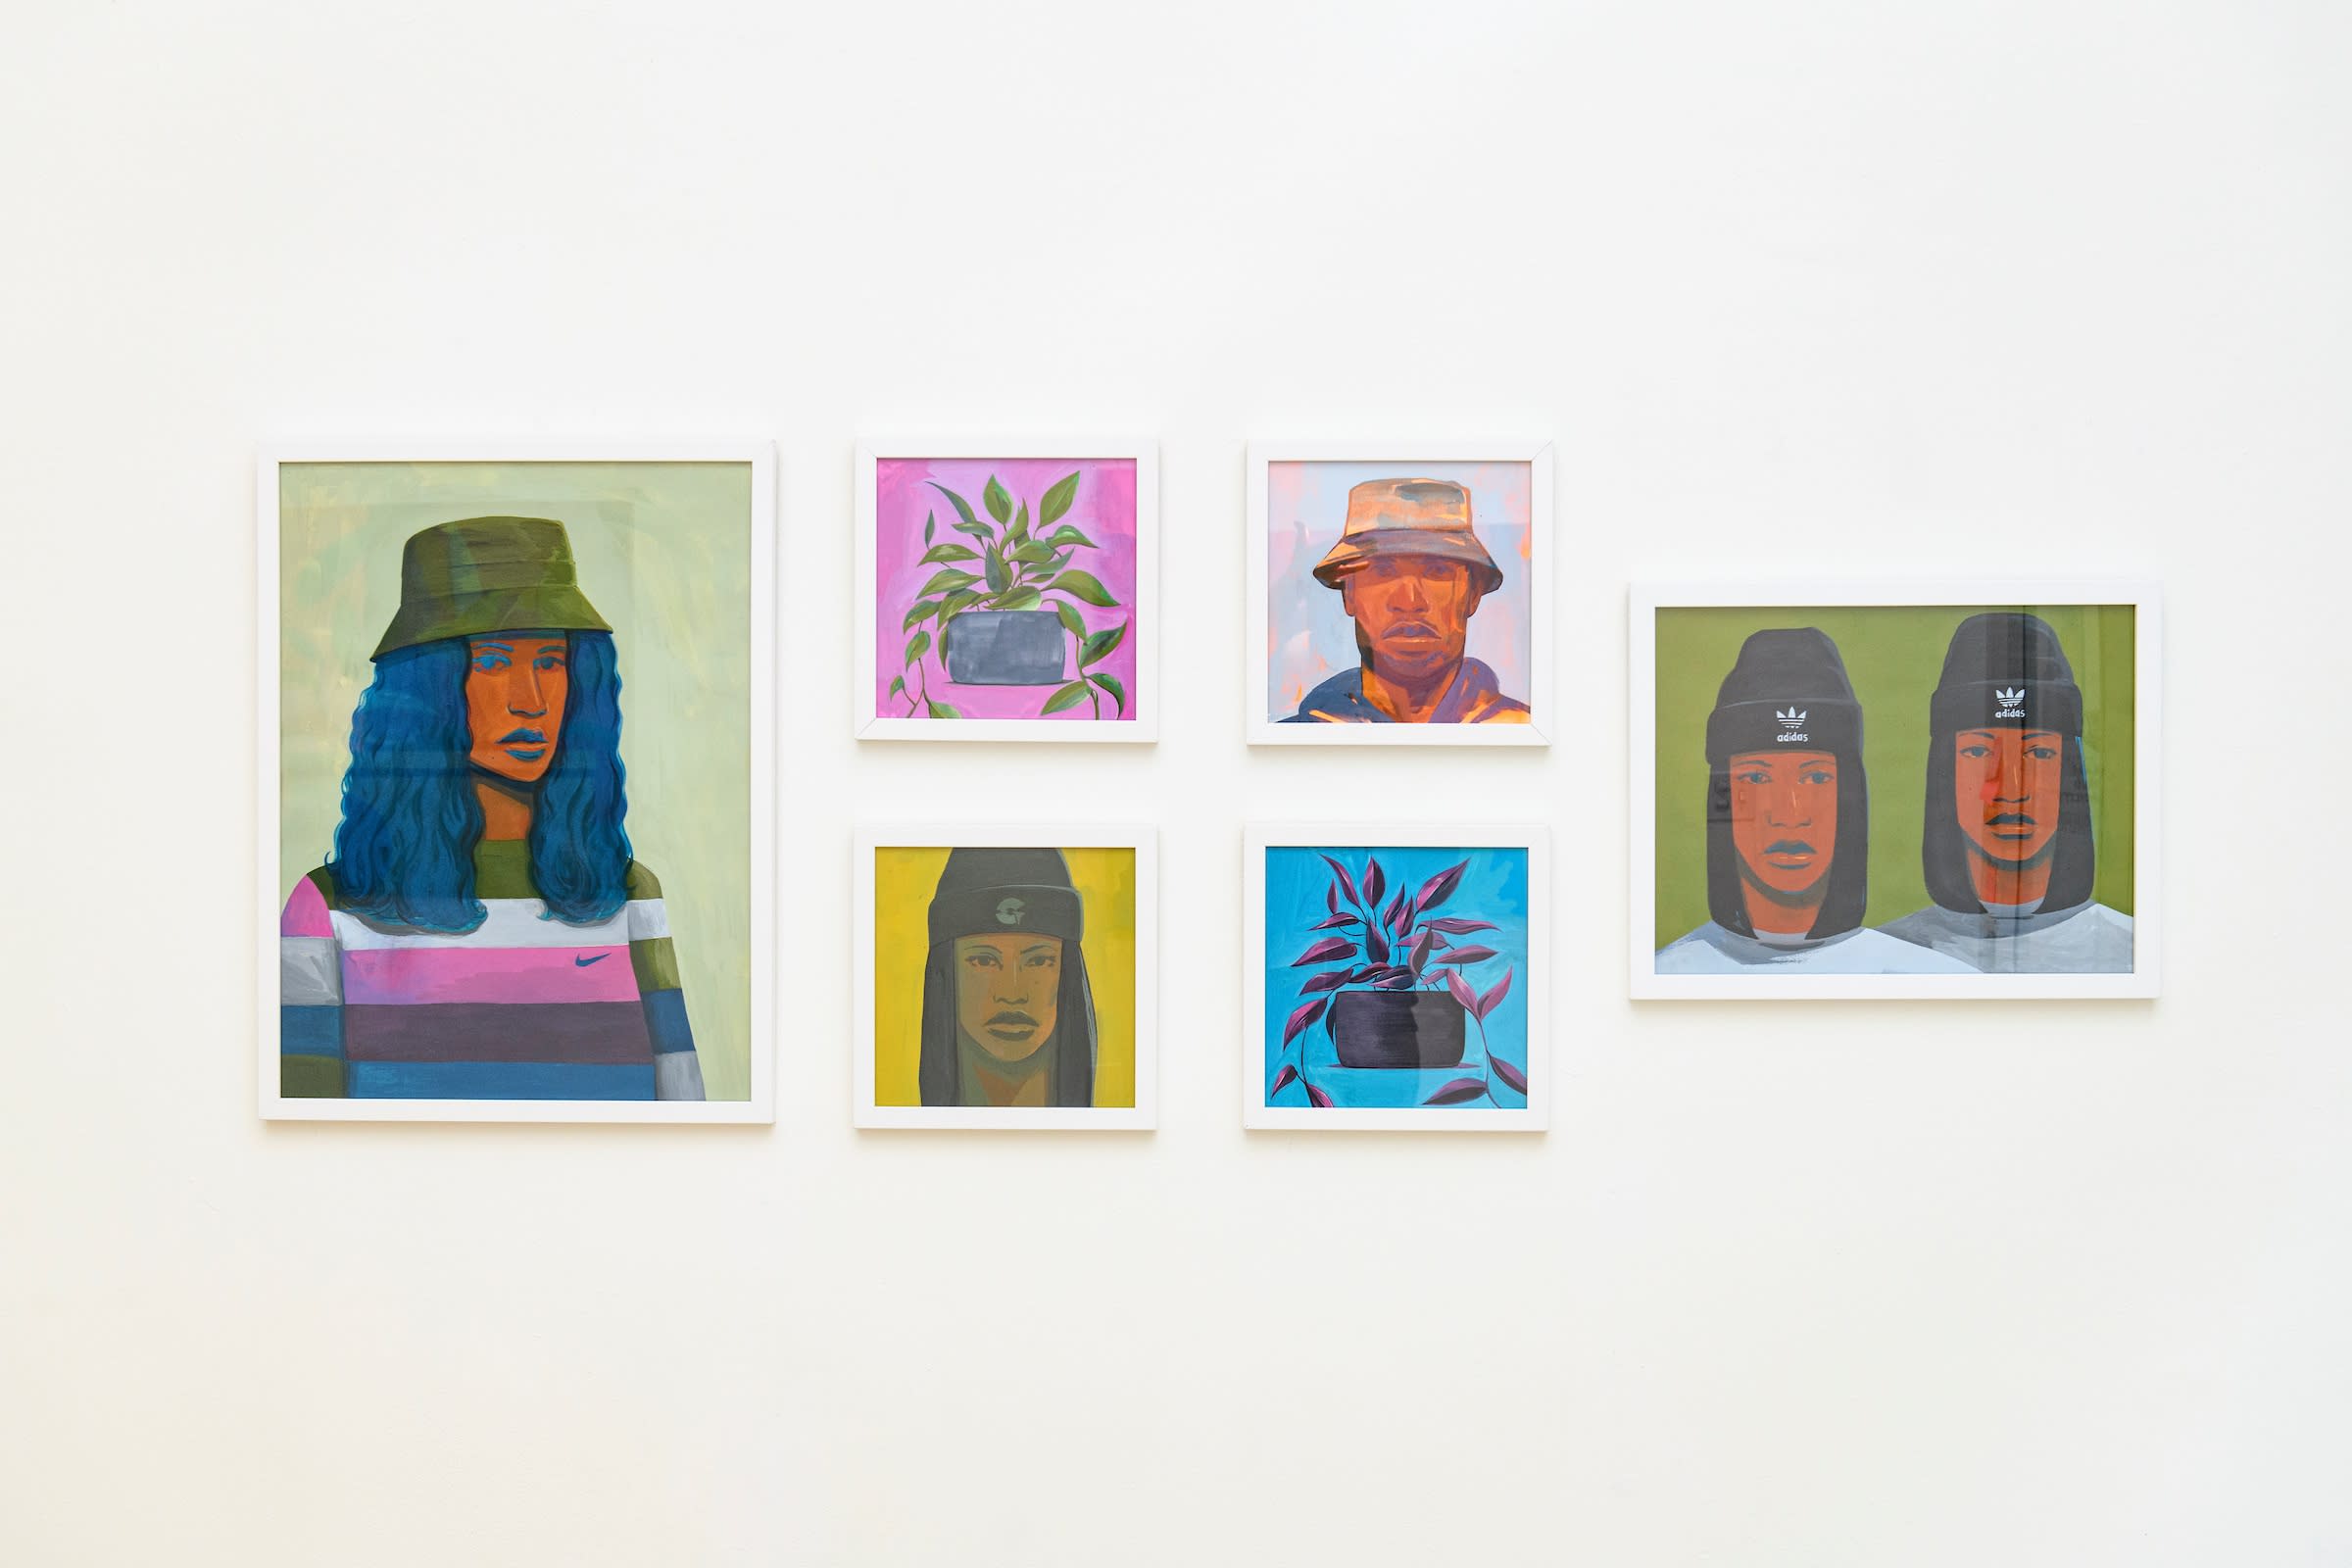 installation view of Dennis Brown's show at Hashimoto Contemporary